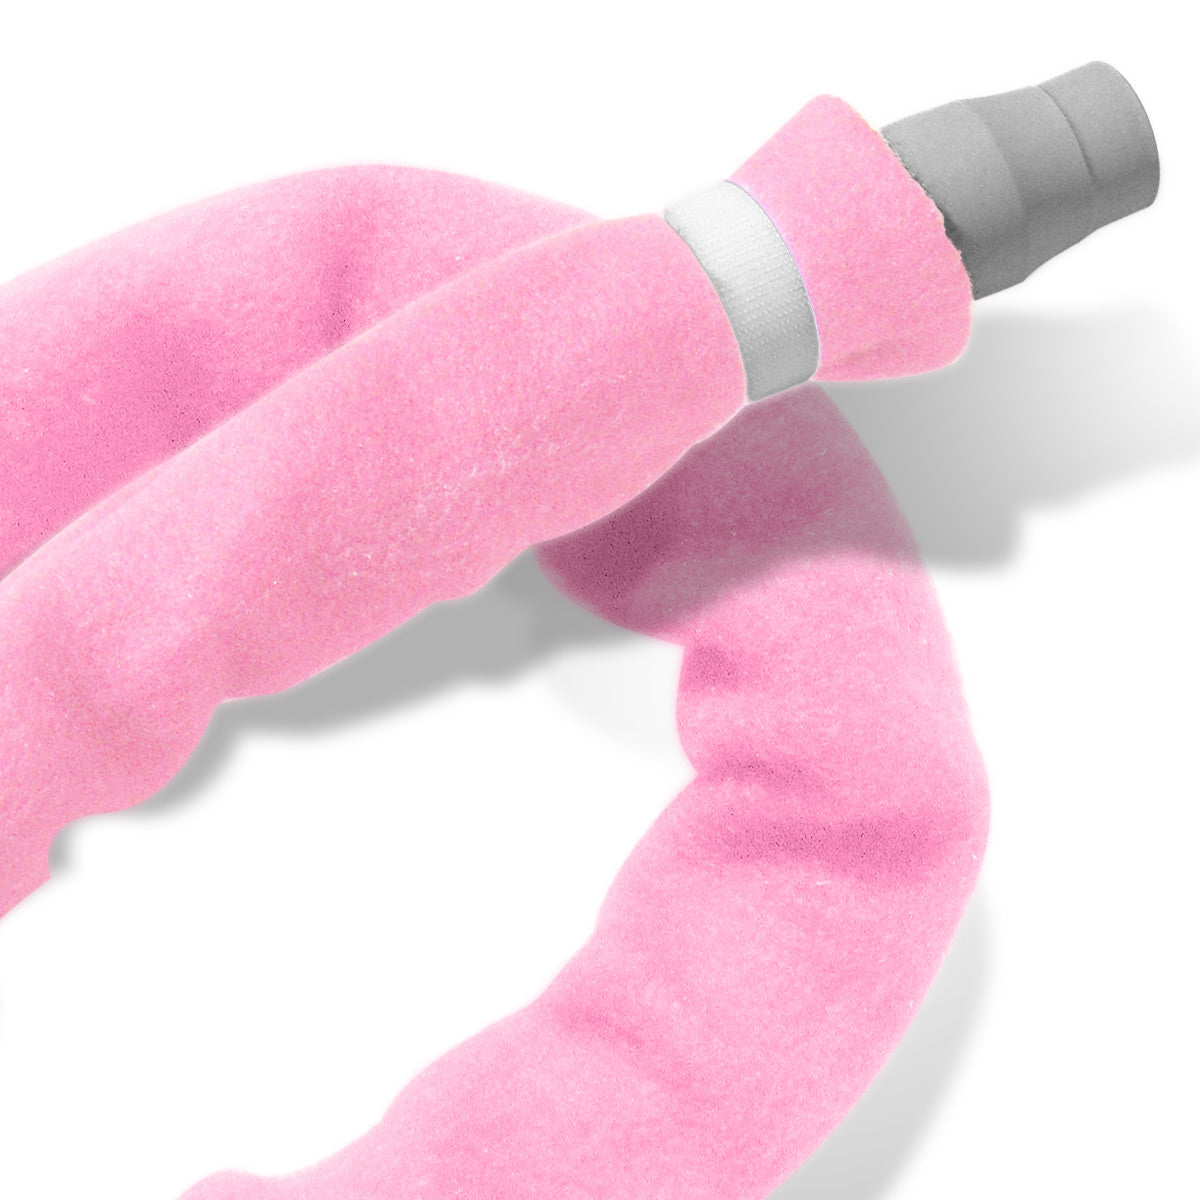 Snuggle Hose Soft Fleece Hose Tube Wraps for CPAP/BiPAP Therapy (6-Foot)